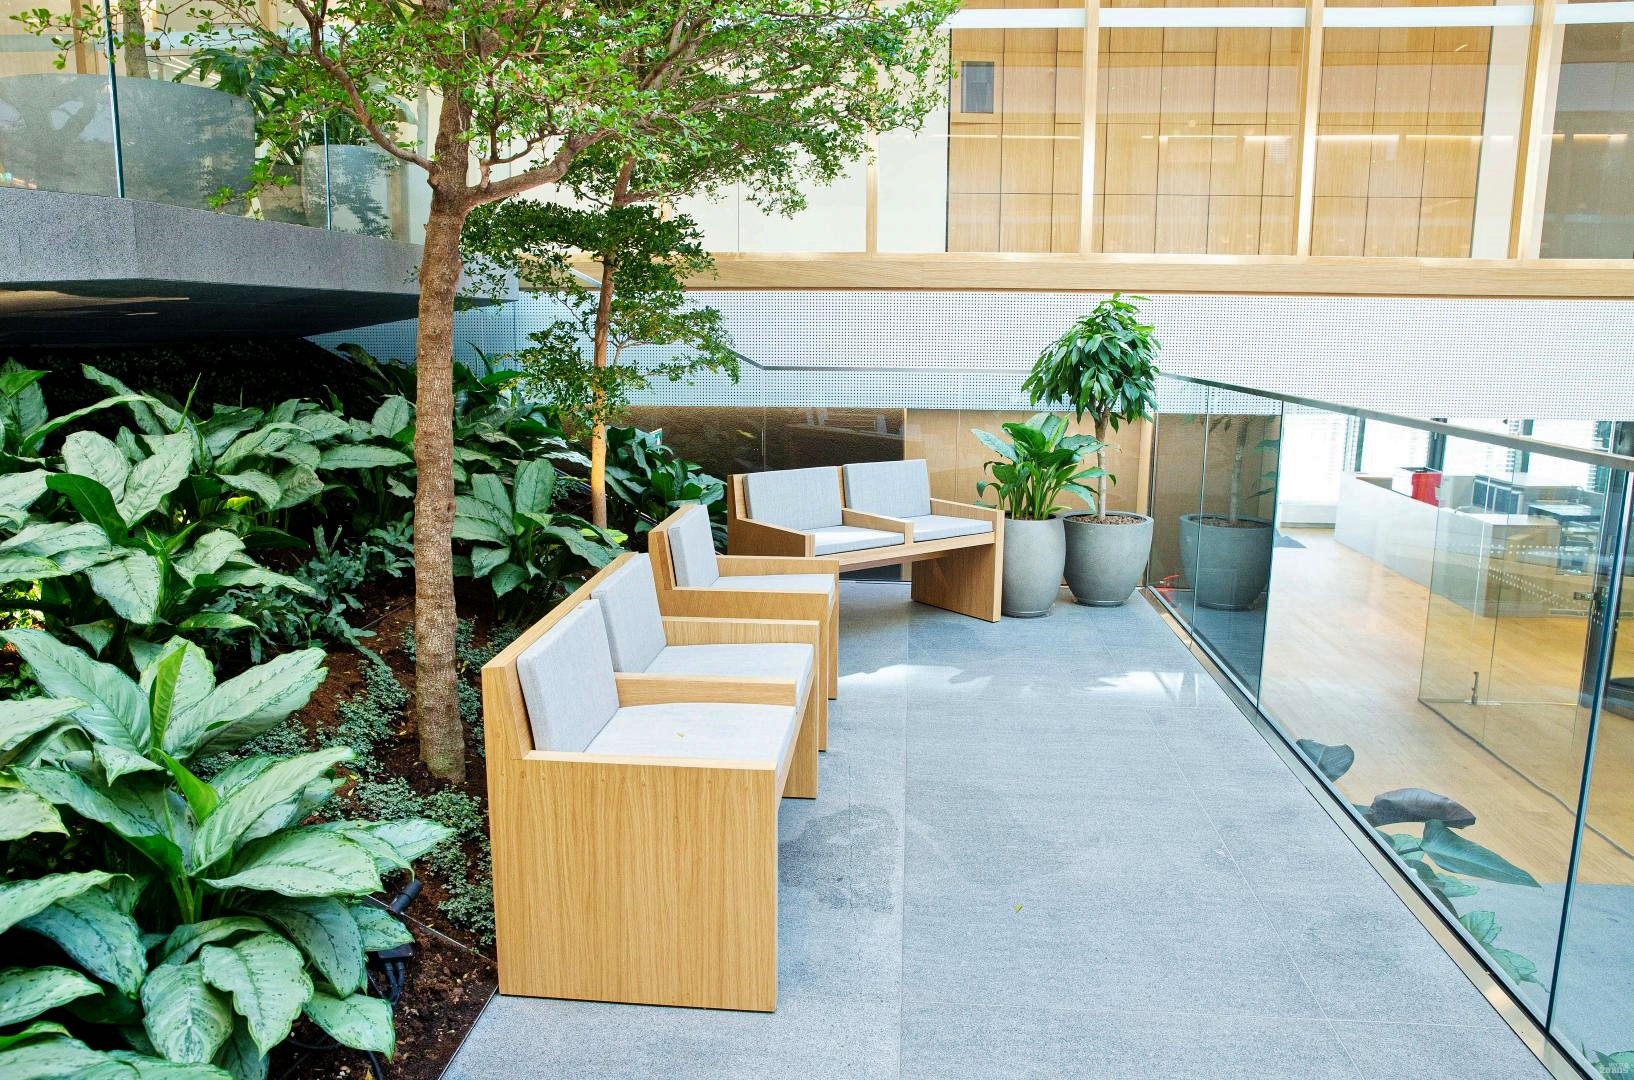 Interior landscaping Lithuania relax zone